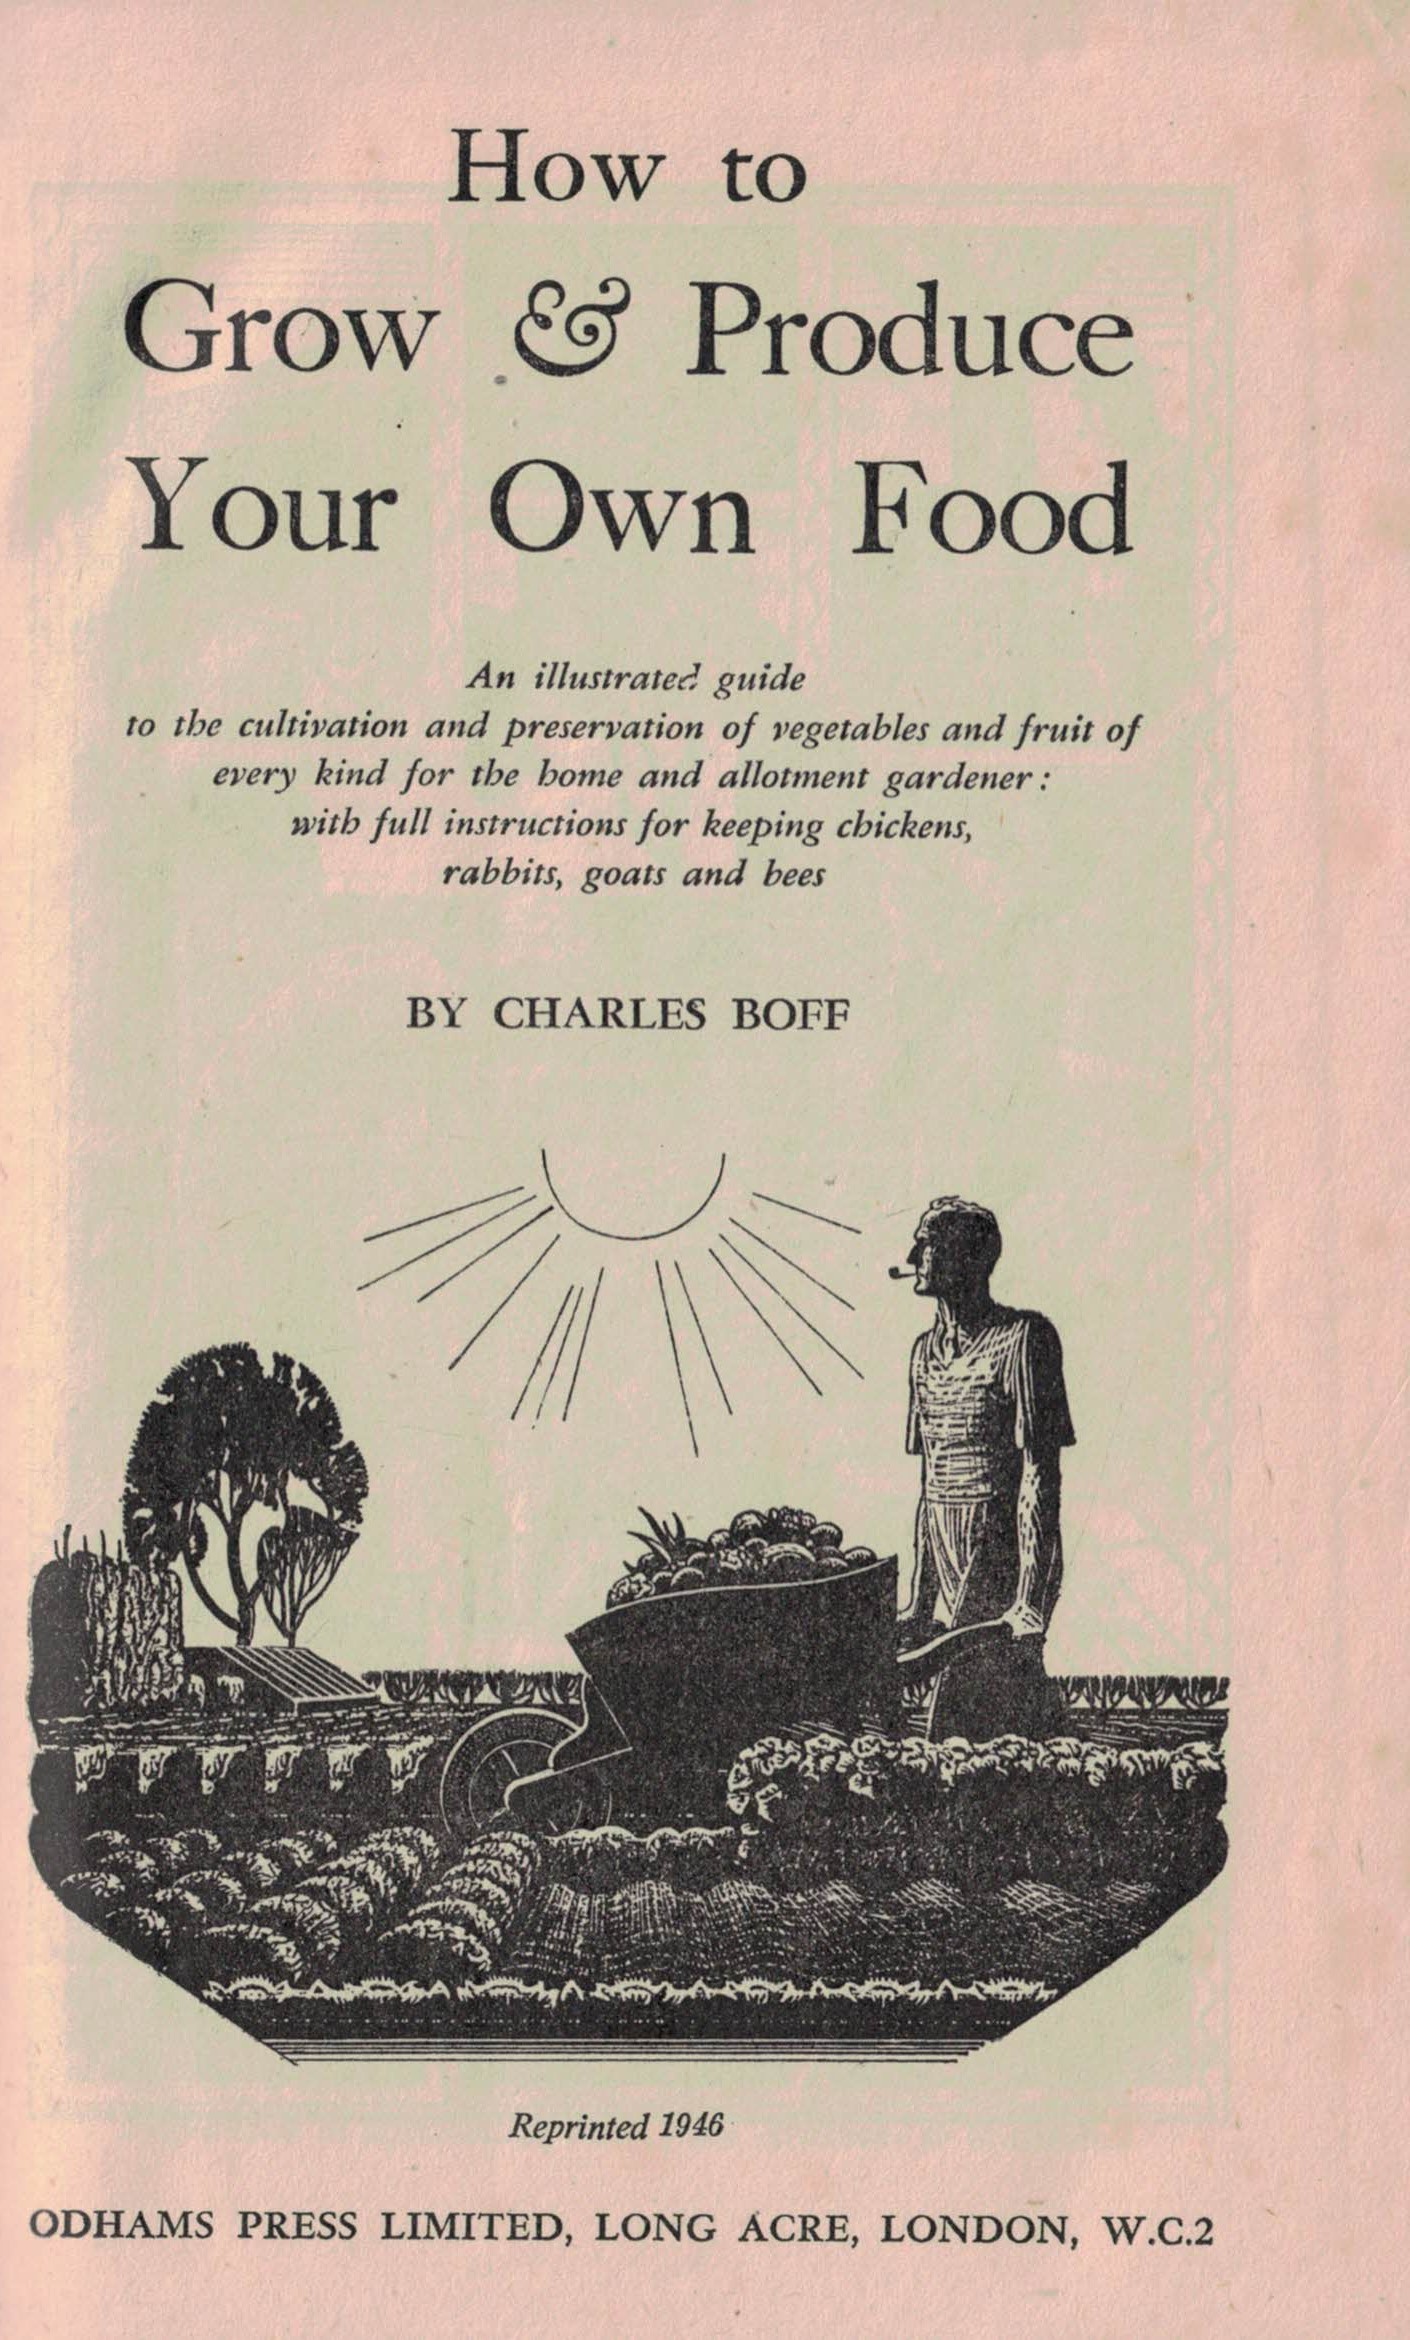 How to Grow & Produce Your Own Food. An Illustrated Guide to the Cultivation and Preservation of Vegetables and Fruit of Every Kind for the Home and Allotment Gardener...